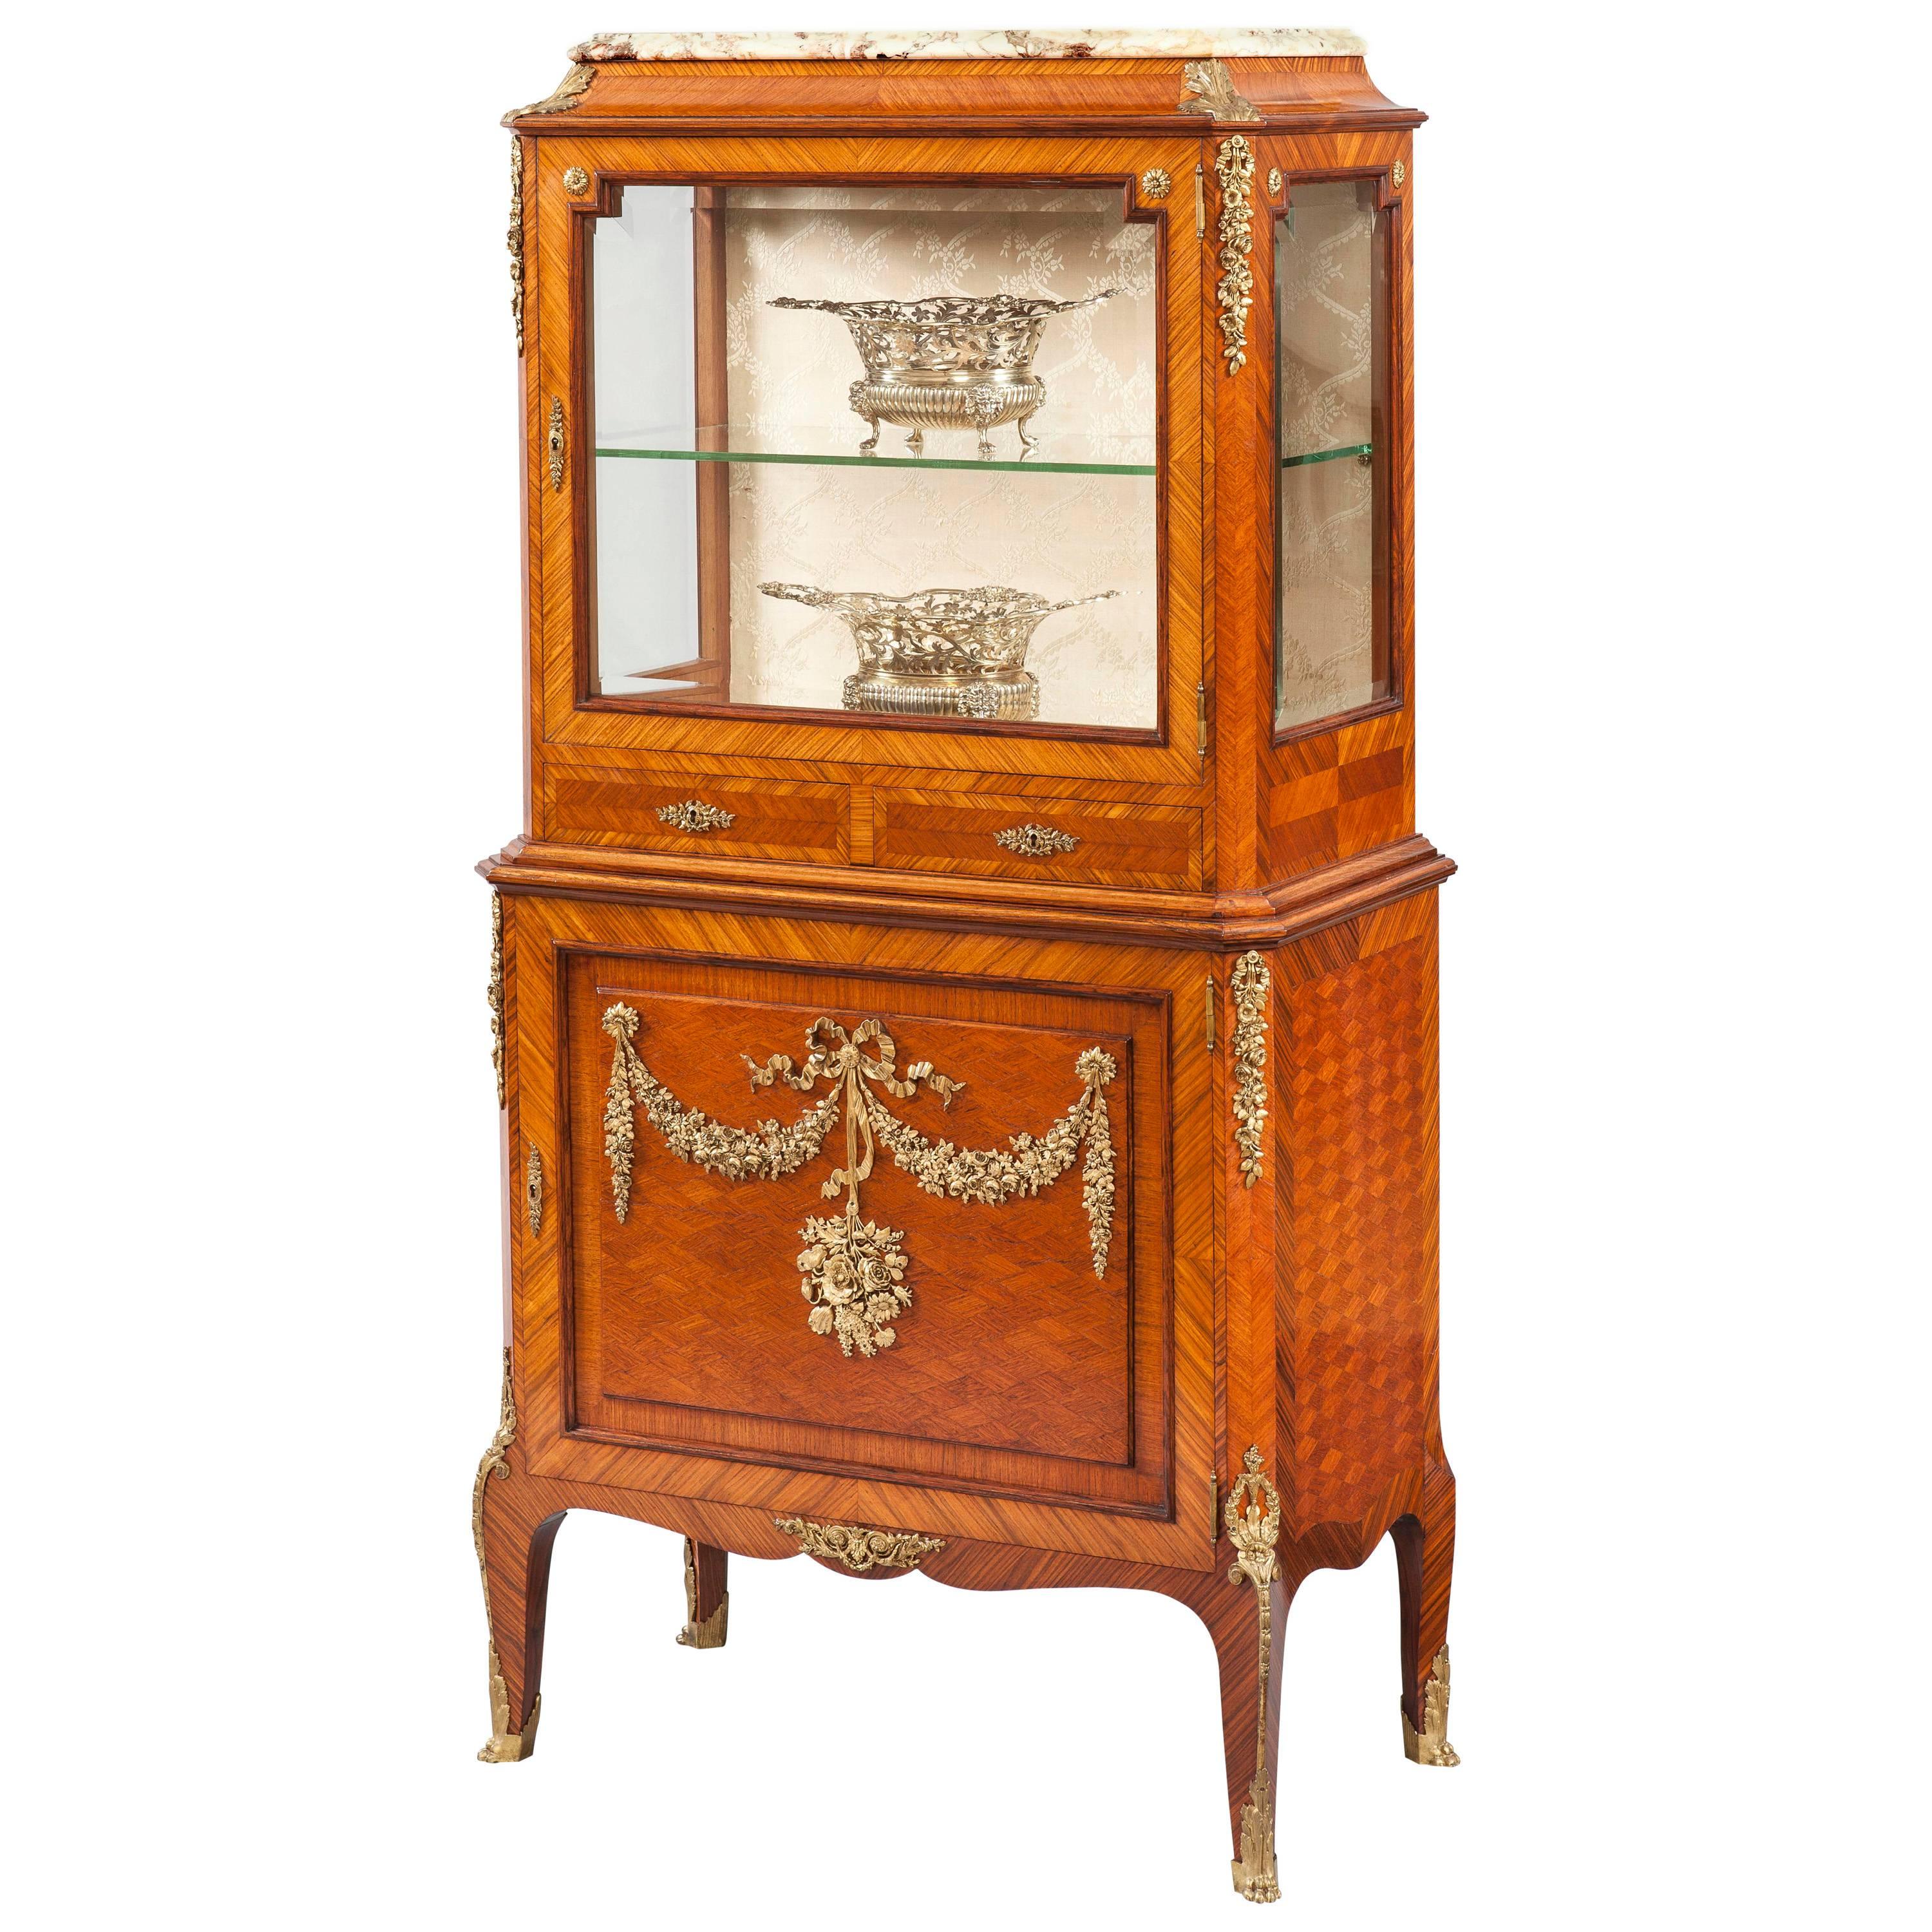 French Kingwood Parquetry and Floral Ormolu-Mounted Cabinet, 19th Century For Sale